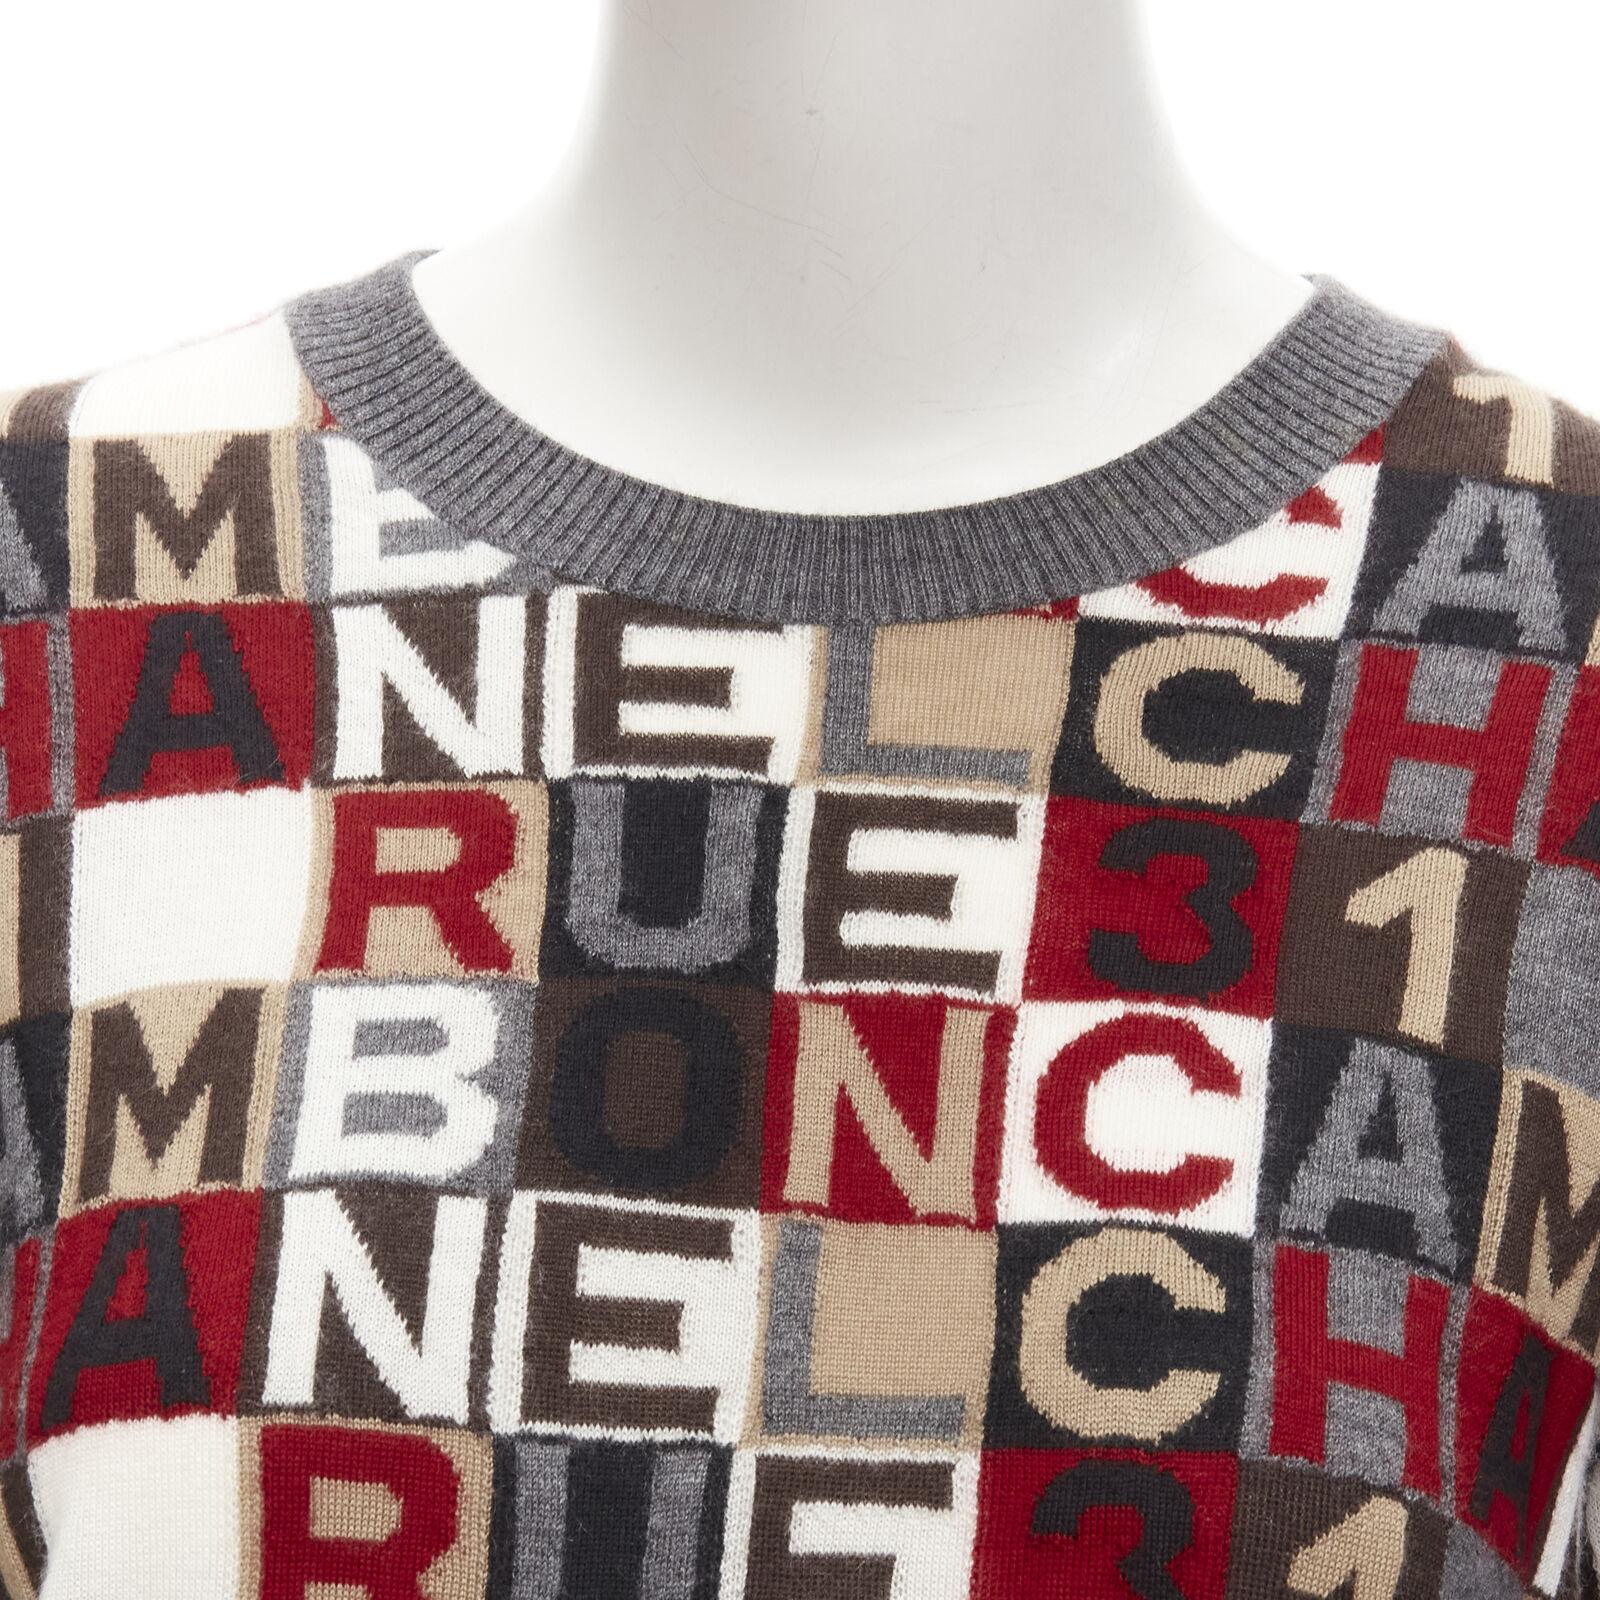 CHANEL 100% cashmere 07A 31 Rue Cambon intarsia sweater top FR42 XL
Reference: TGAS/C01624
Brand: Chanel
Designer: Karl Lagerfeld
Collection: 07A
Material: 100% Cashmere
Color: Multicolour
Pattern: Monogram
Closure: Pullover
Made in: